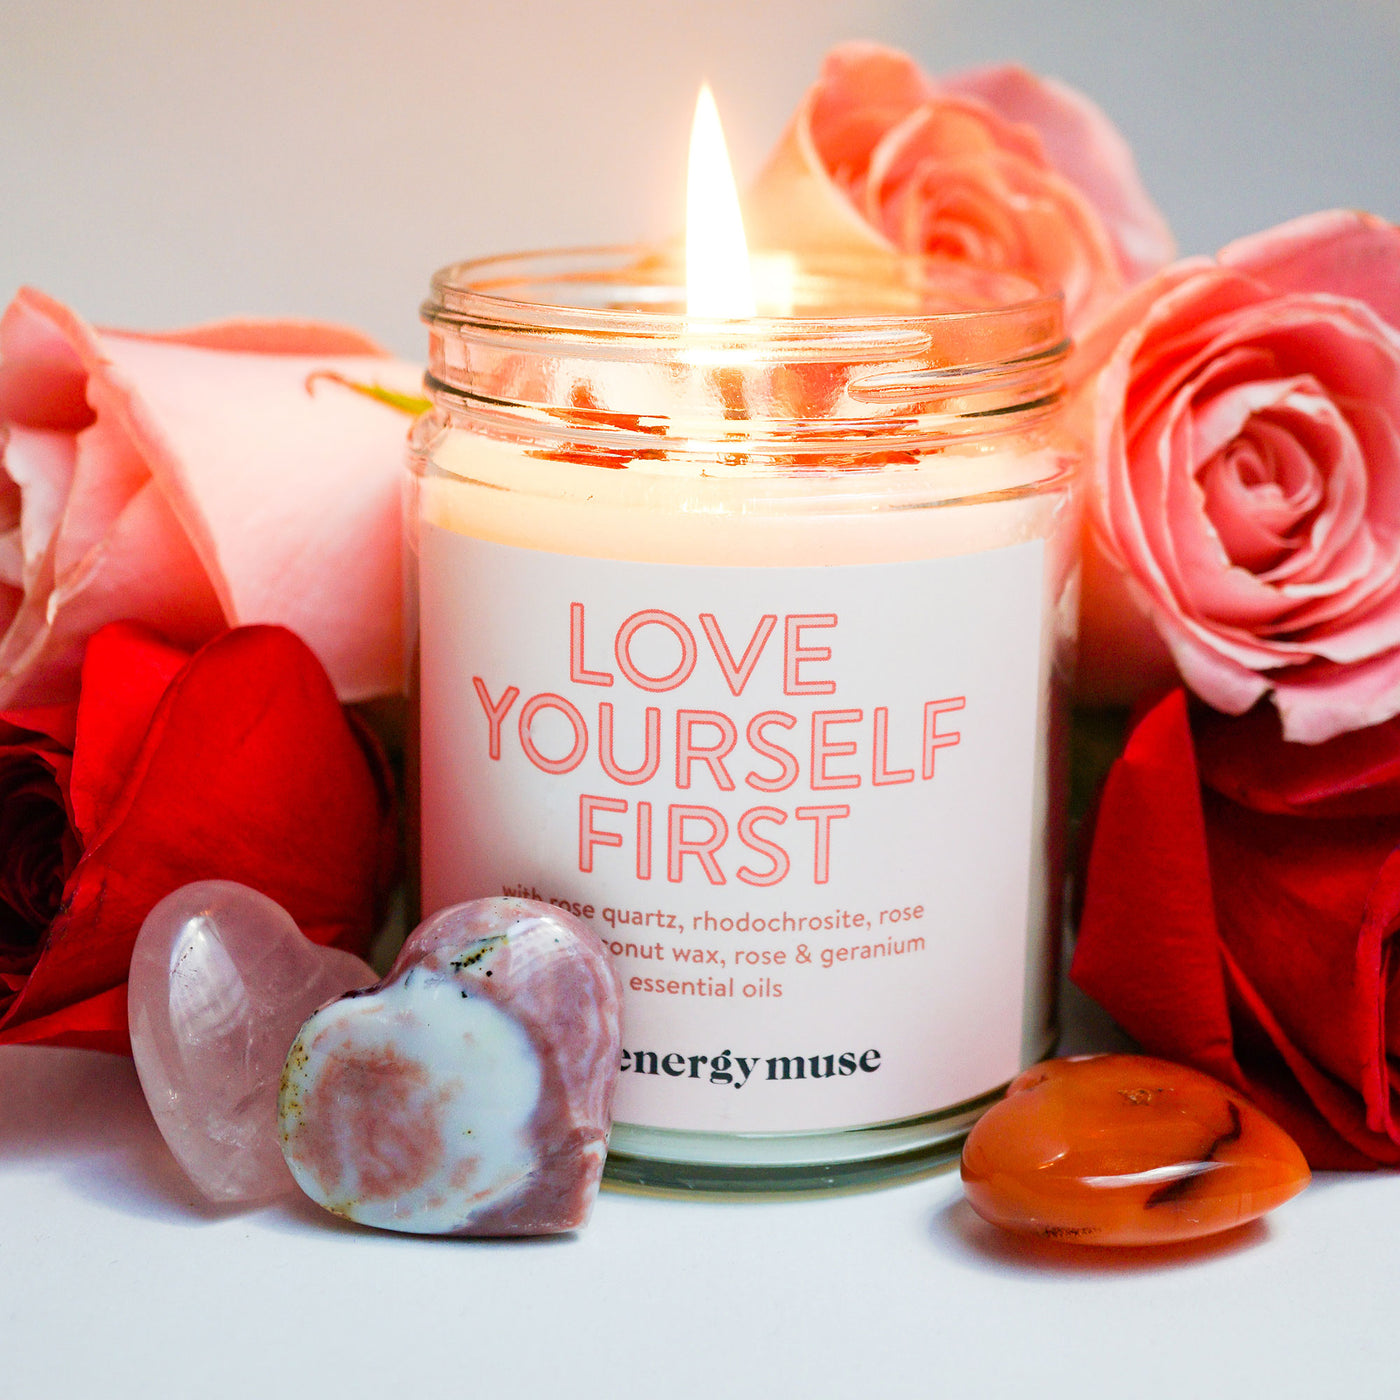 Love Yourself First Crystal Candle